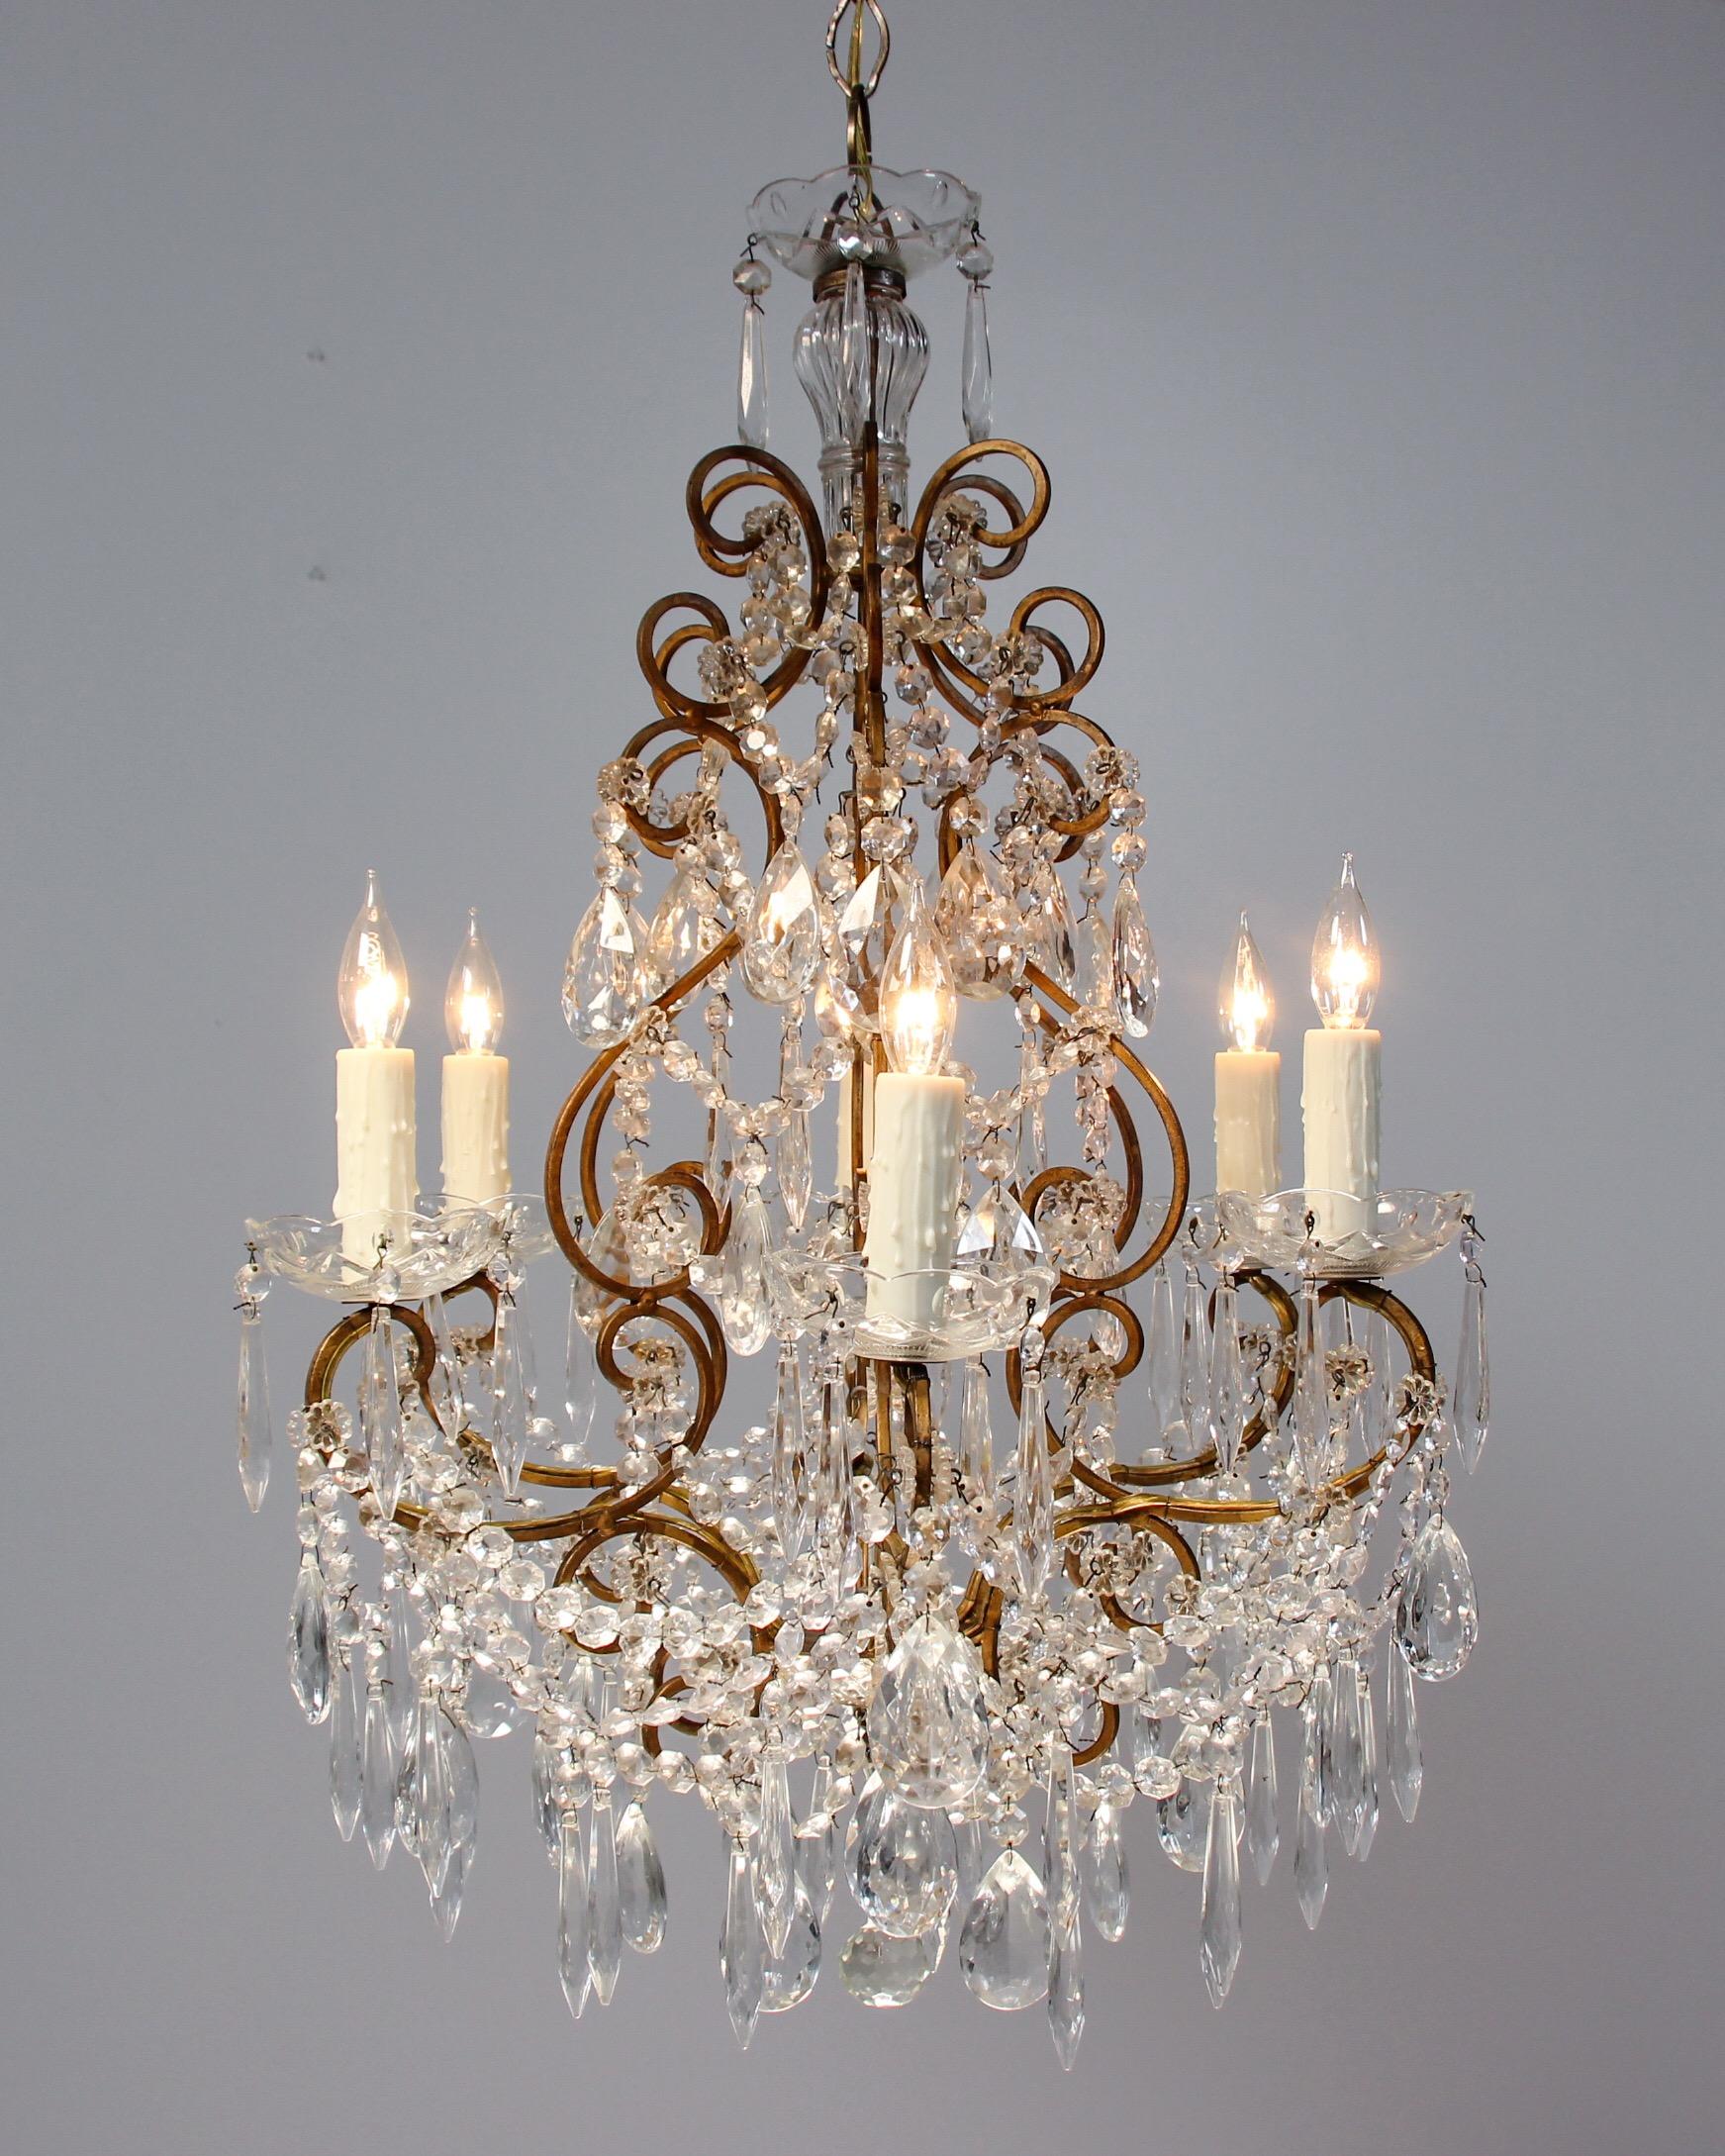      Elegant, 1950s Italian chandelier featuring a scrolly gilt-iron frame generously decorated with crystal prisms and garlands. 
     Substantial in appearance, the chandelier would accent any space nicely. 
     Wired and in working condition.